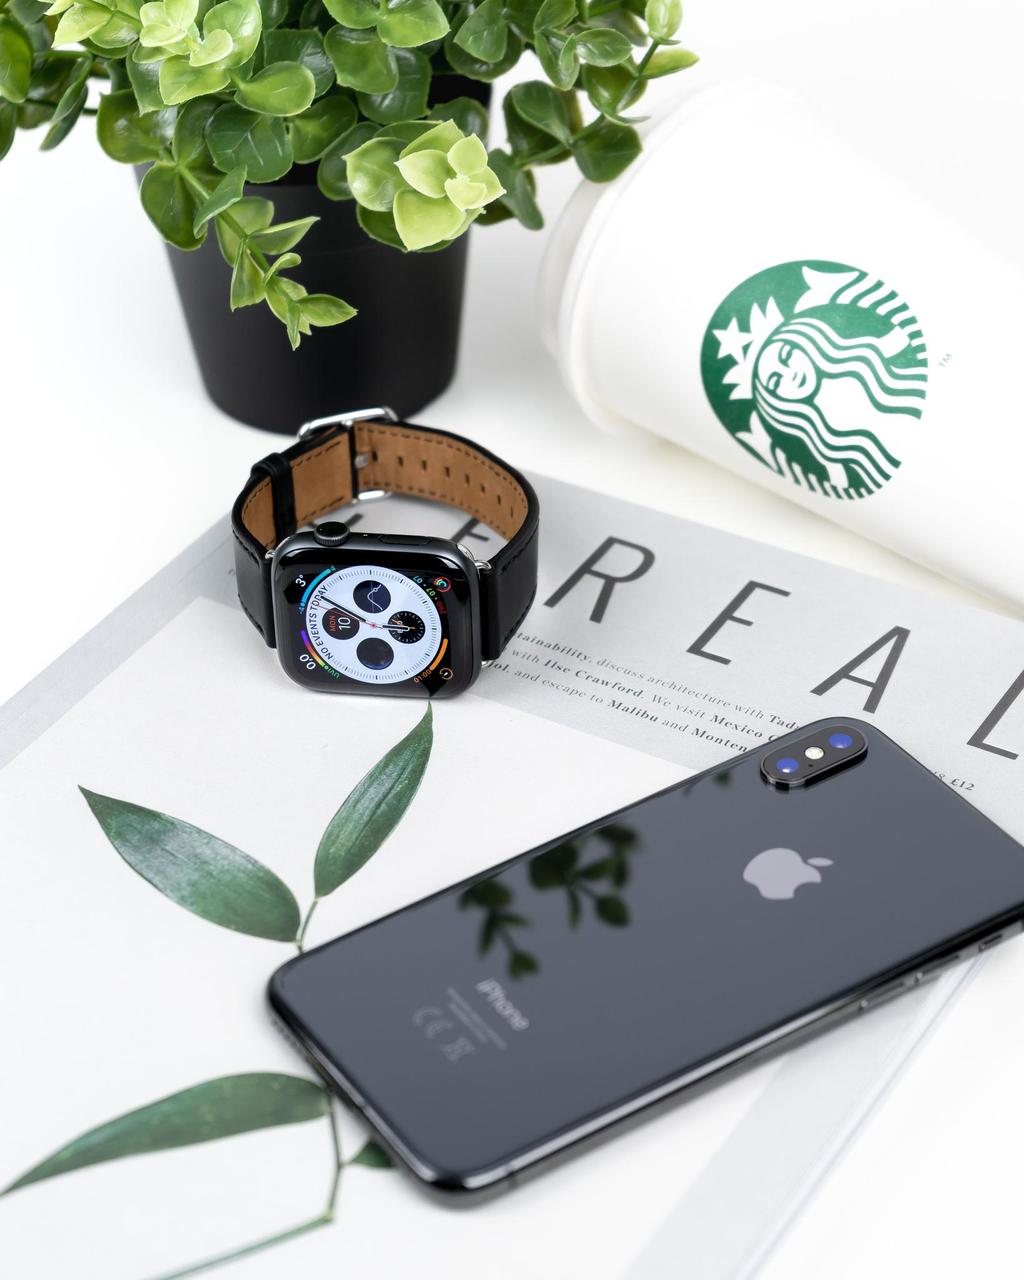 Apple watch and Iphone on magazine